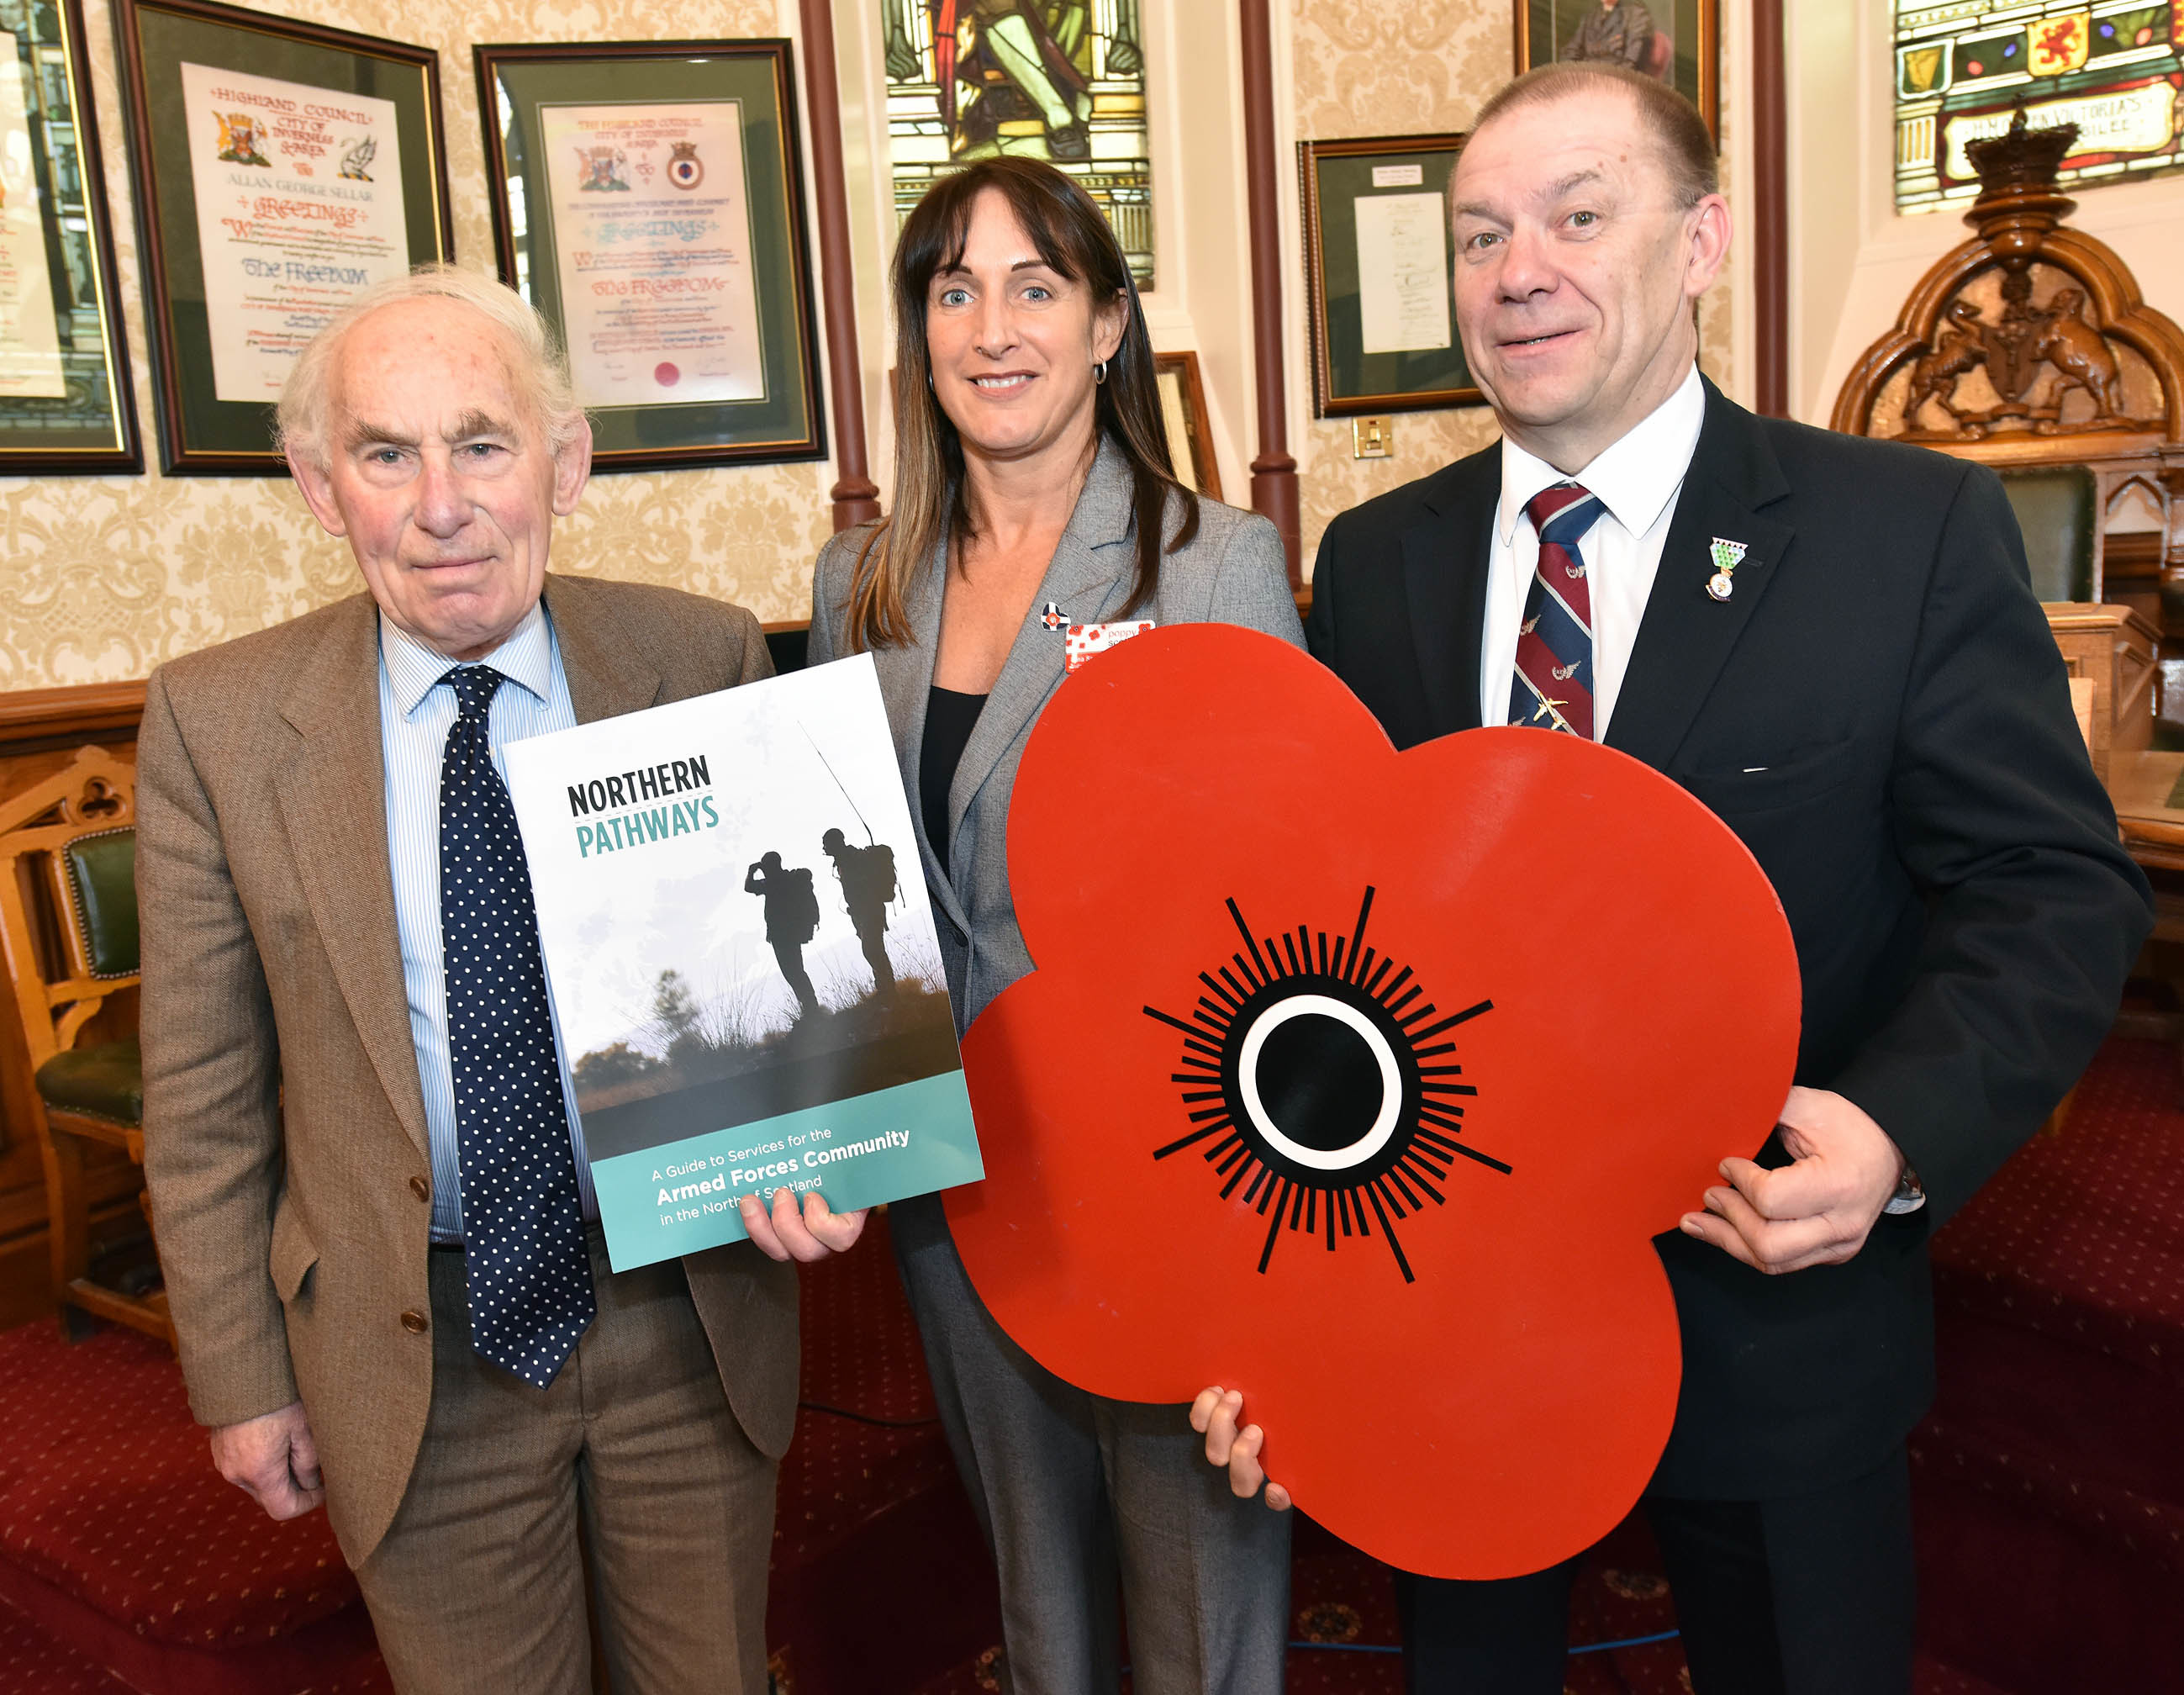 From left: Cllr Roddy Balfour, Poppyscotland Welfare Services Manager Nina Semple, and Cllr Chris Tuke